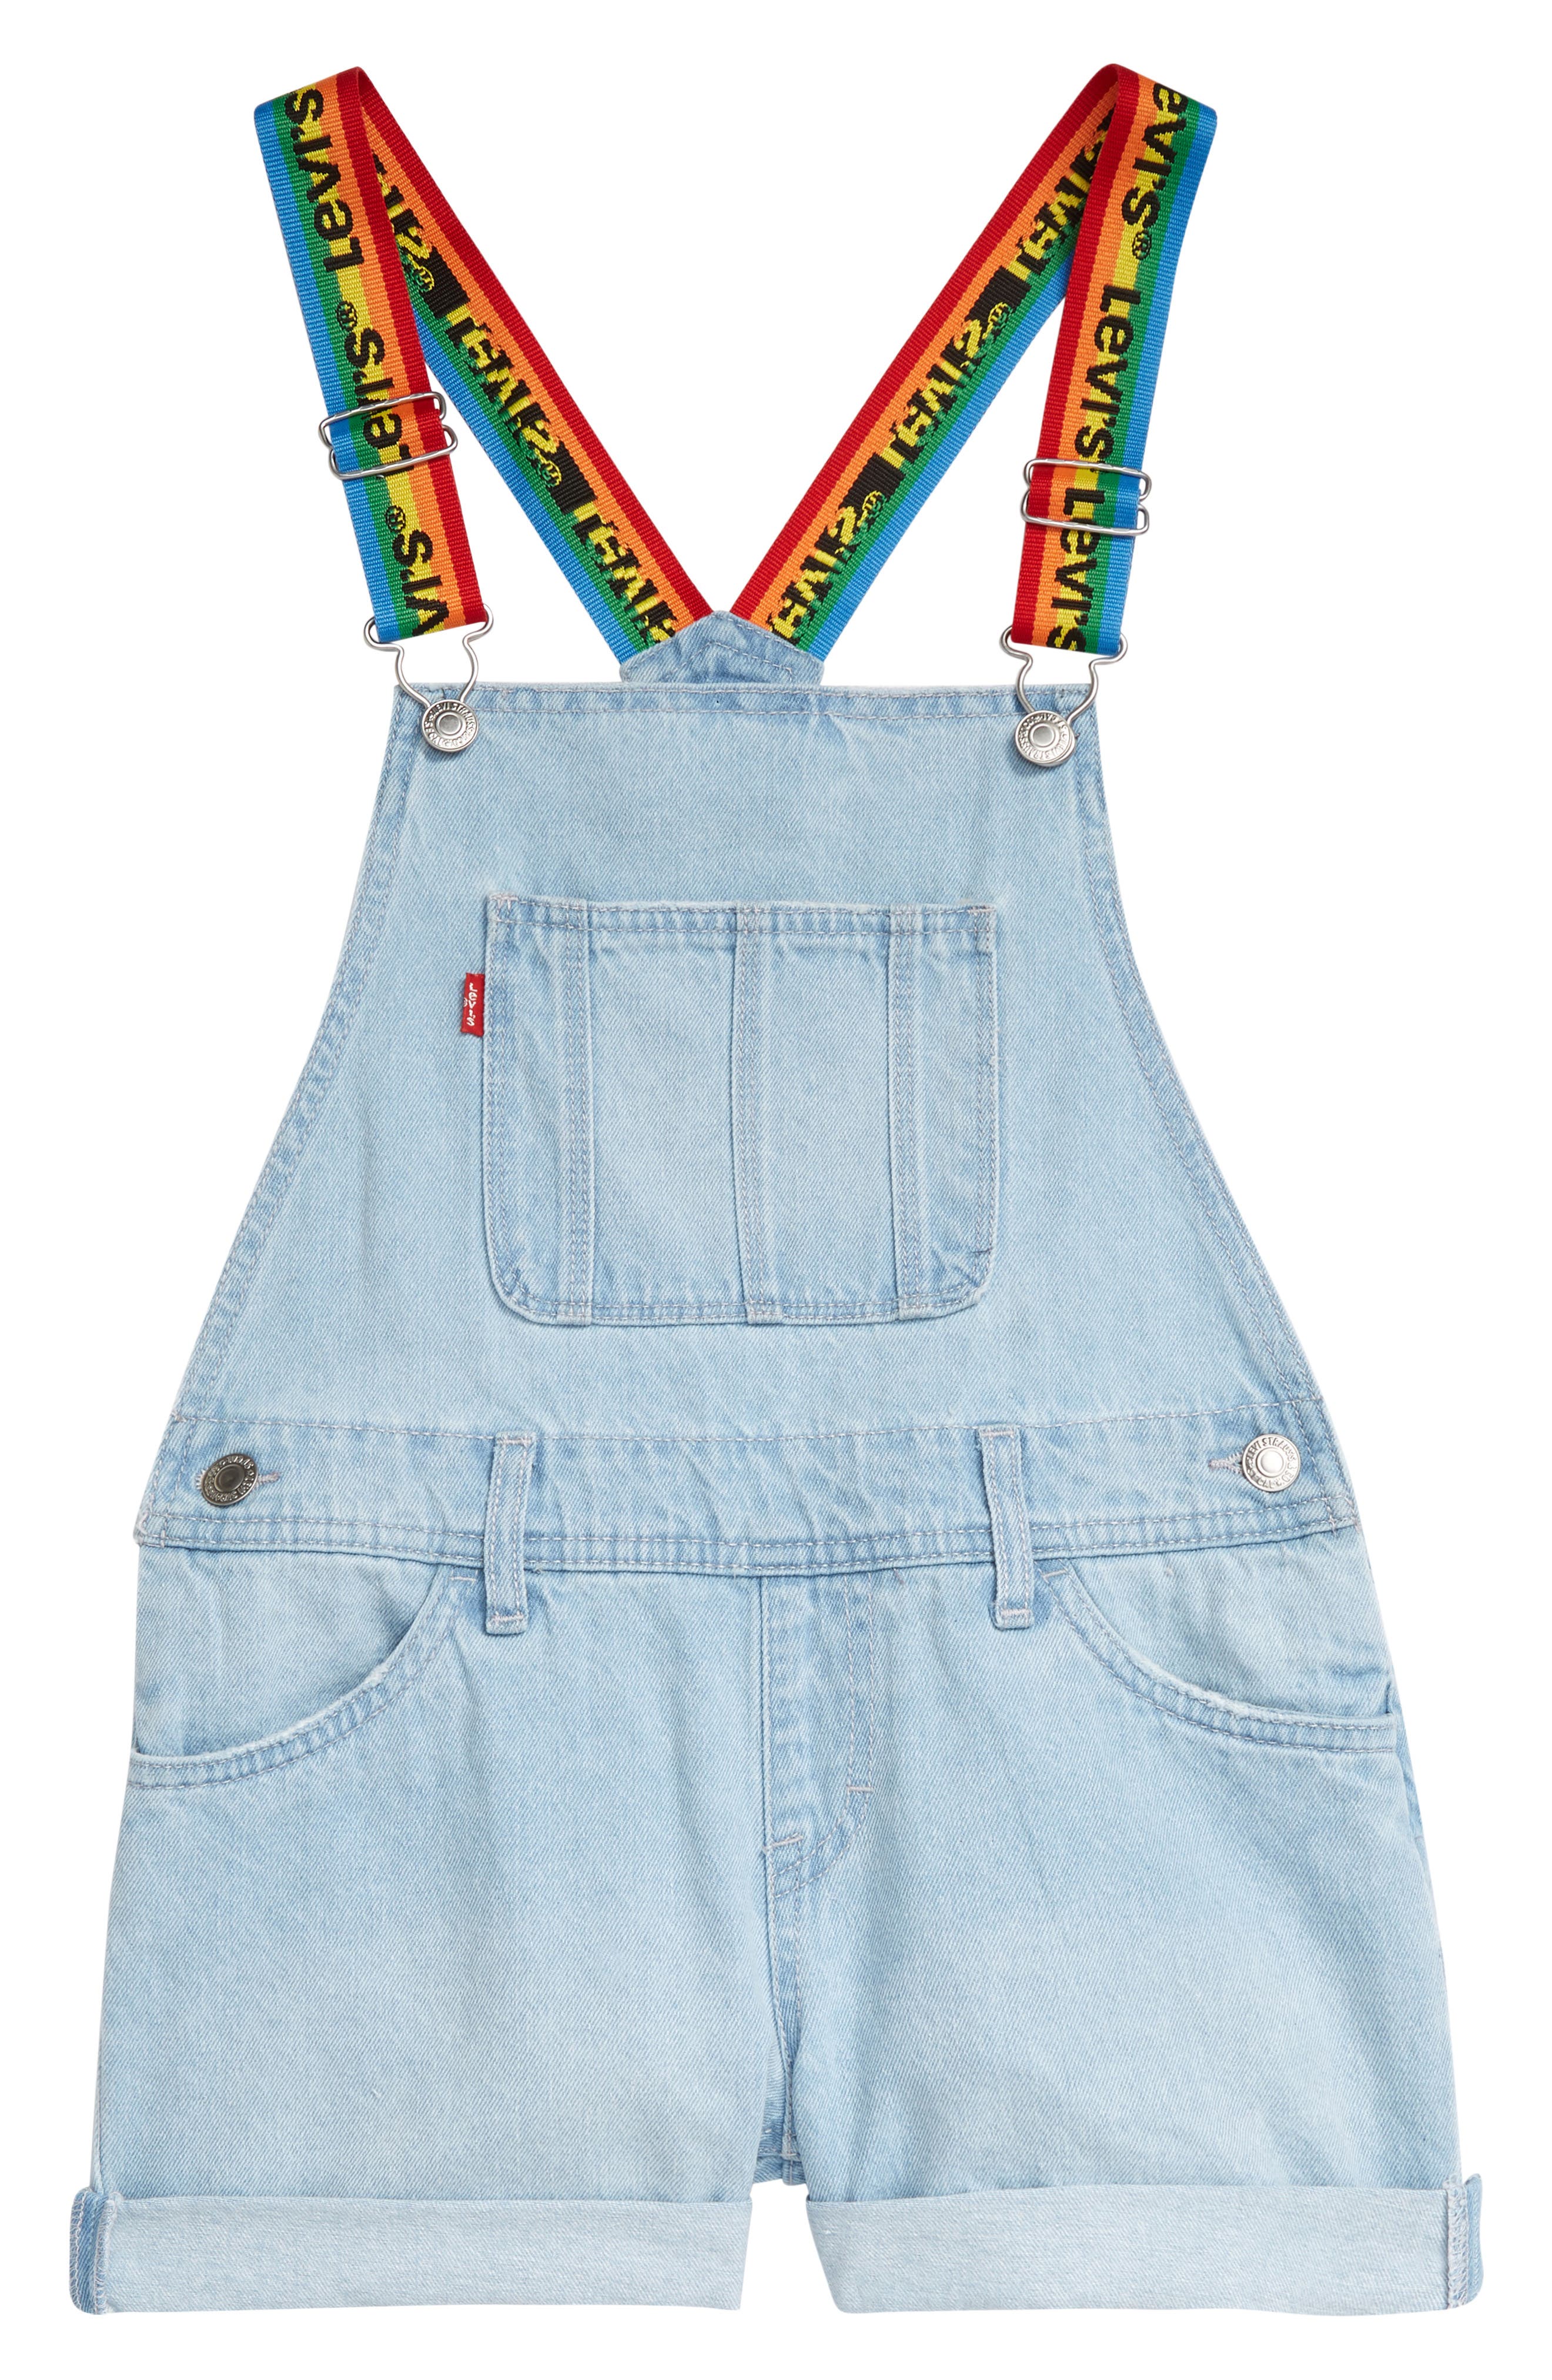 jeans rompers for teenager